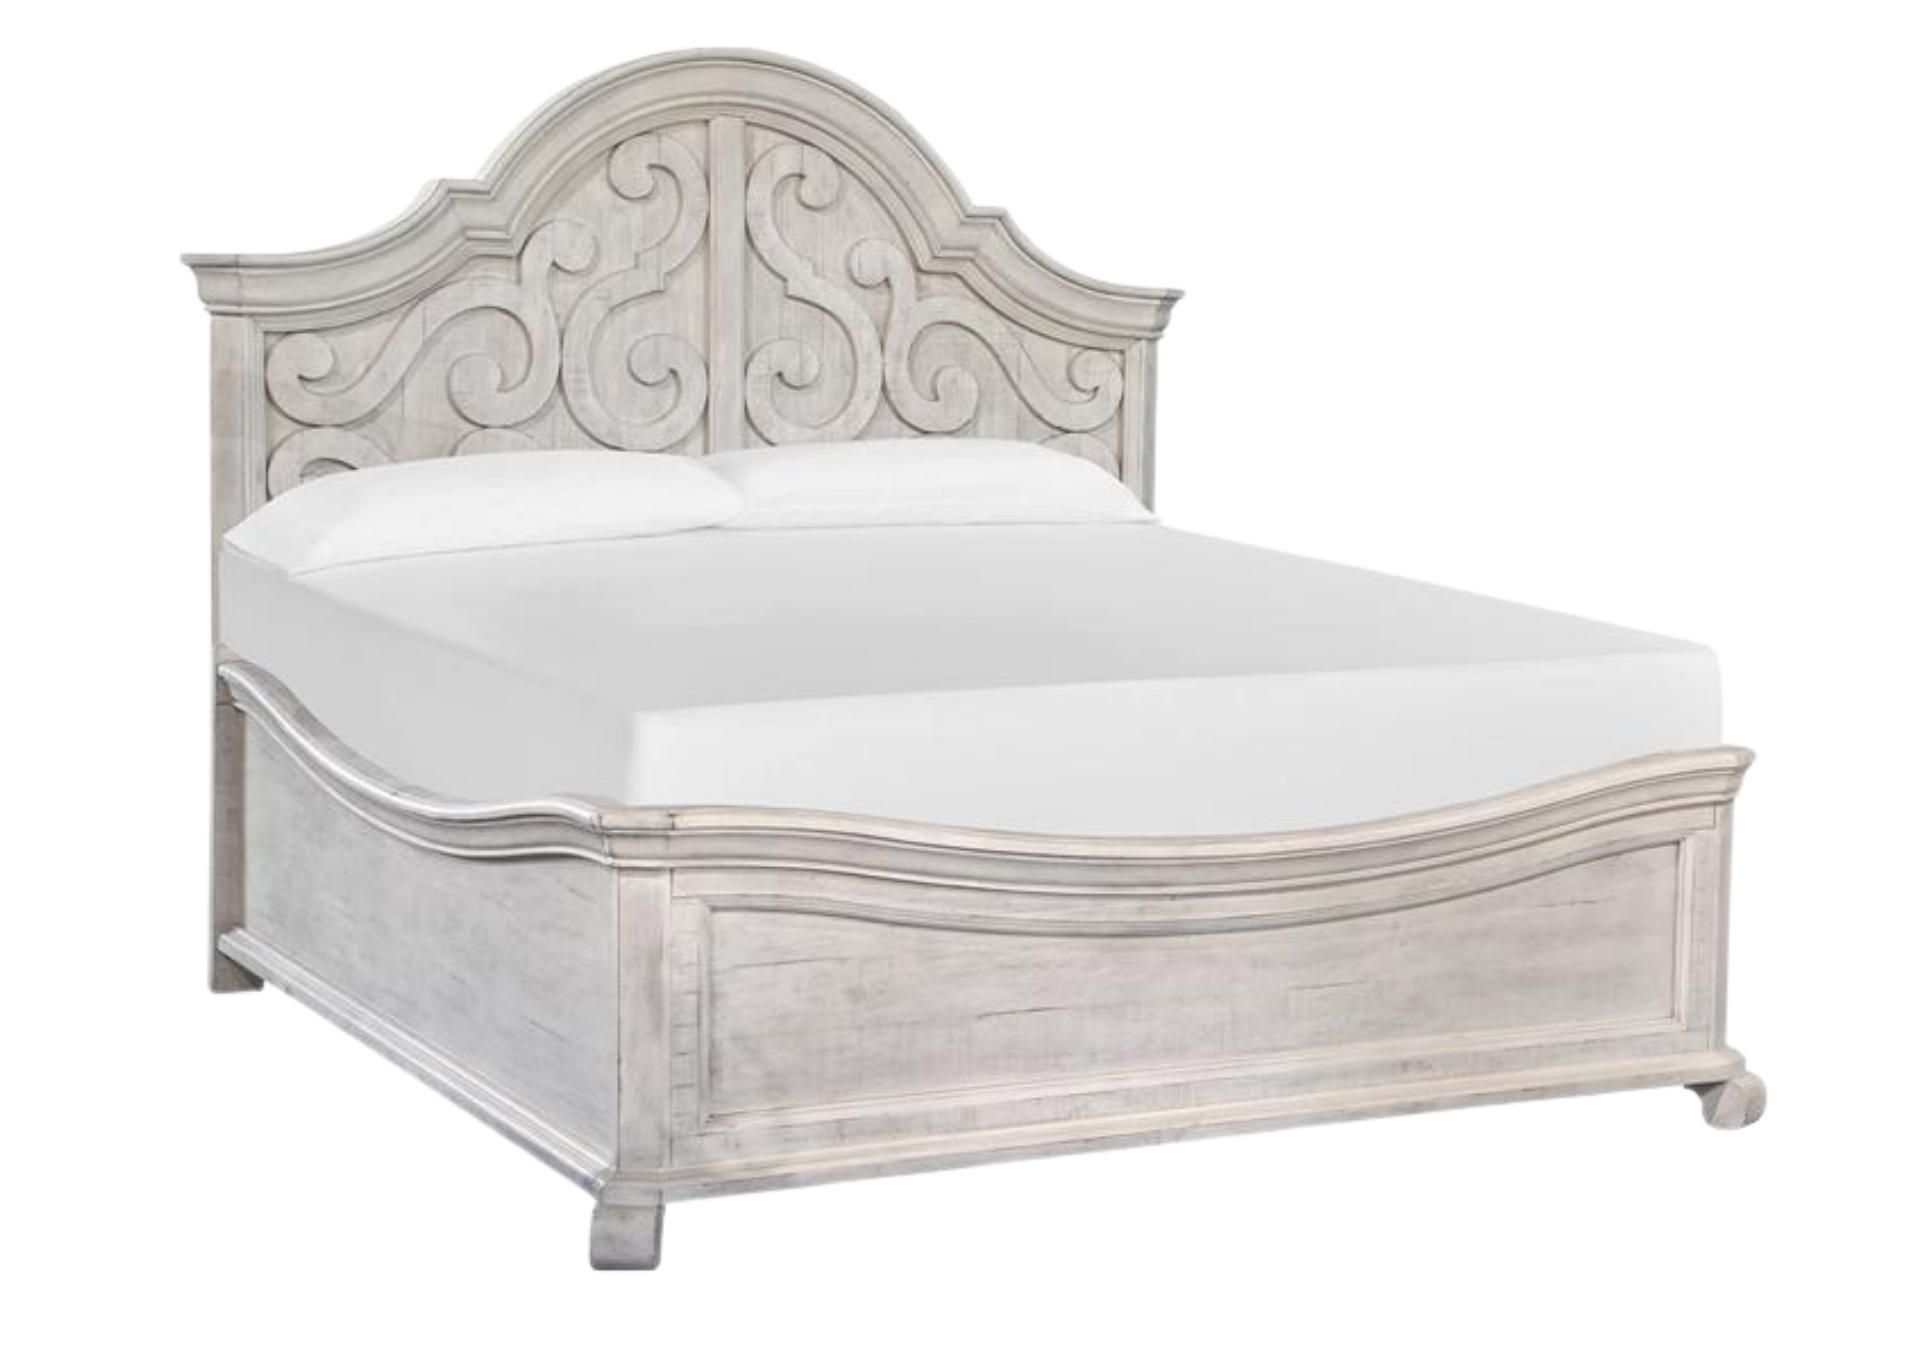 BRONWYN QUEEN SHAPED PANEL BED,MAGS